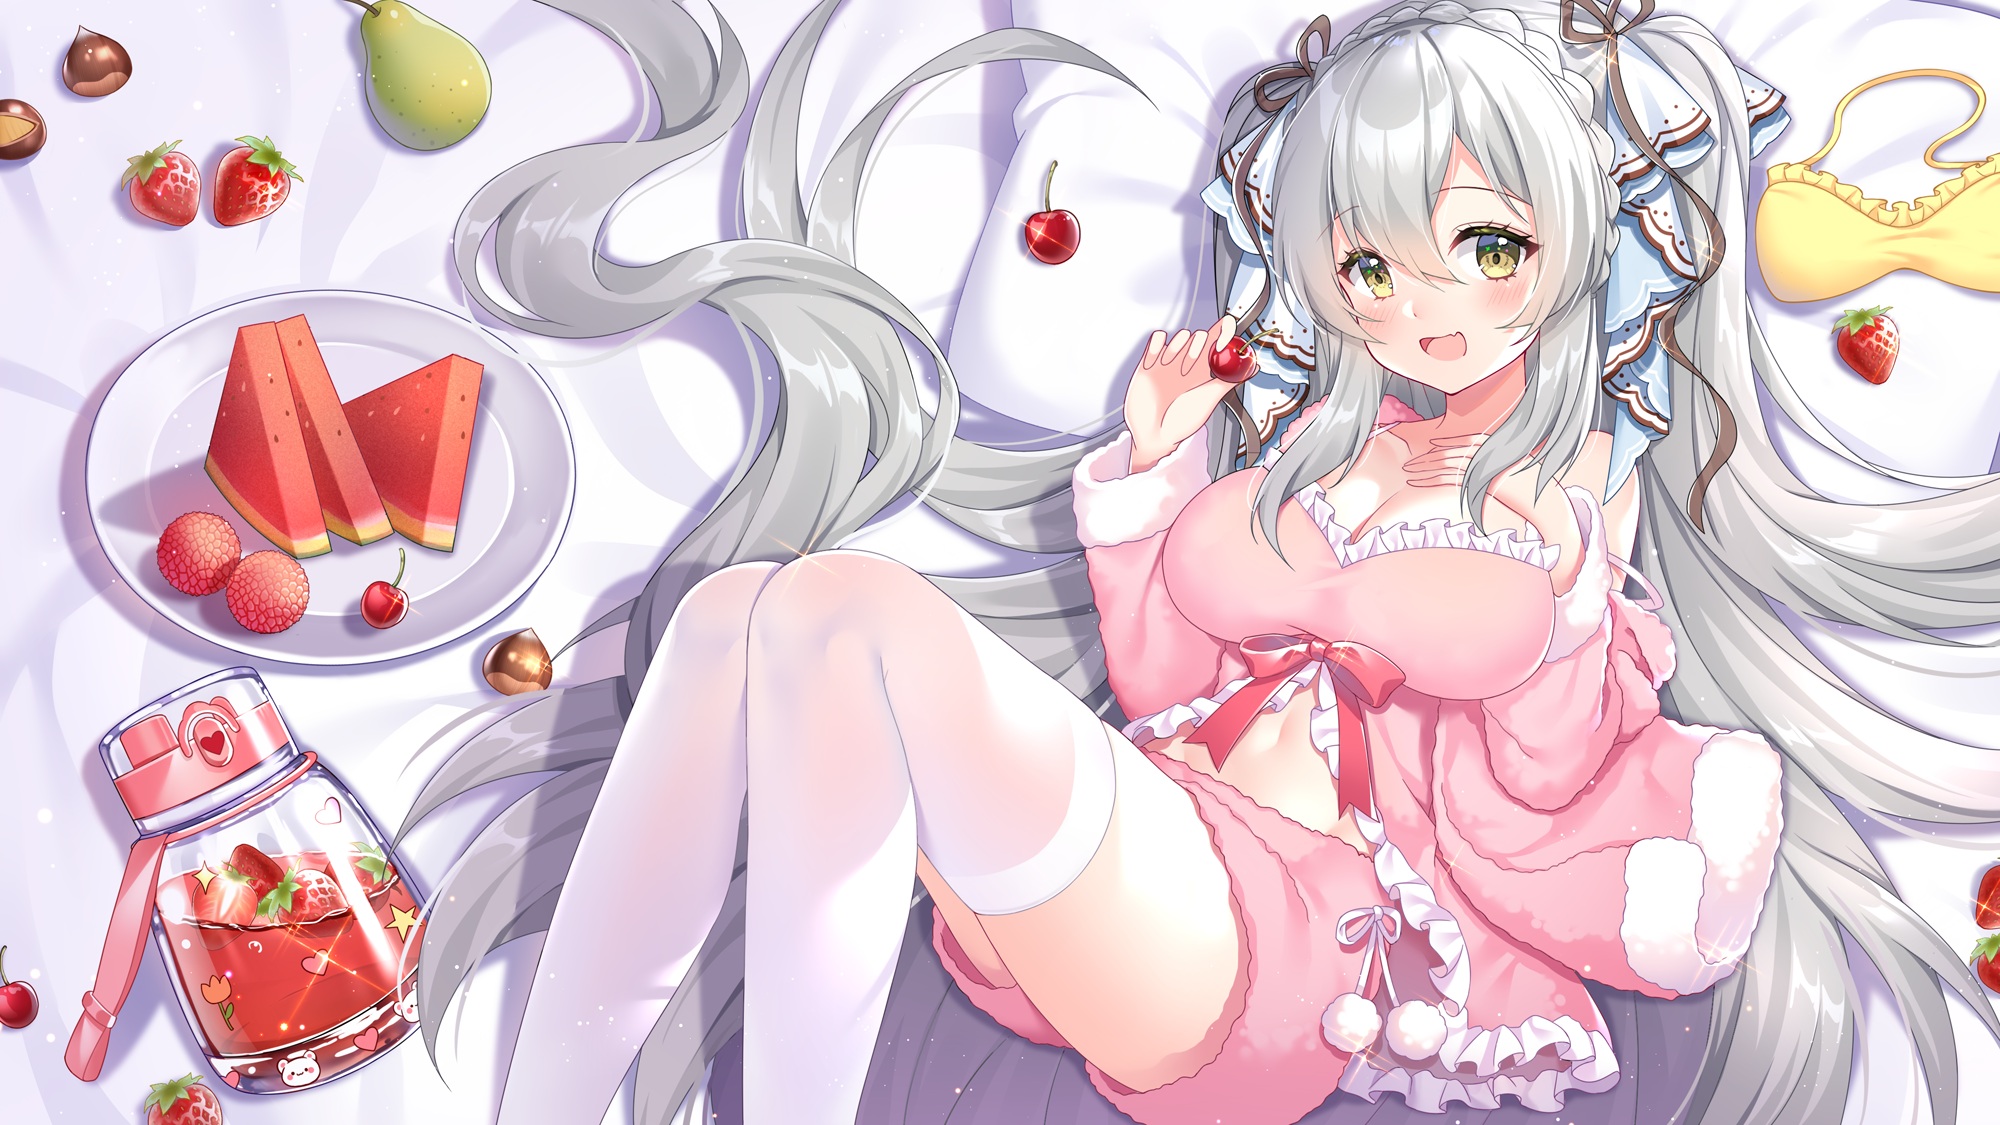 Anime 2000x1125 anime anime girls knees together food fruit strawberries watermelons nuts cherries big boobs yellow eyes long hair silver hair pyjamas thigh-highs in bed artwork Ogino-M looking at viewer